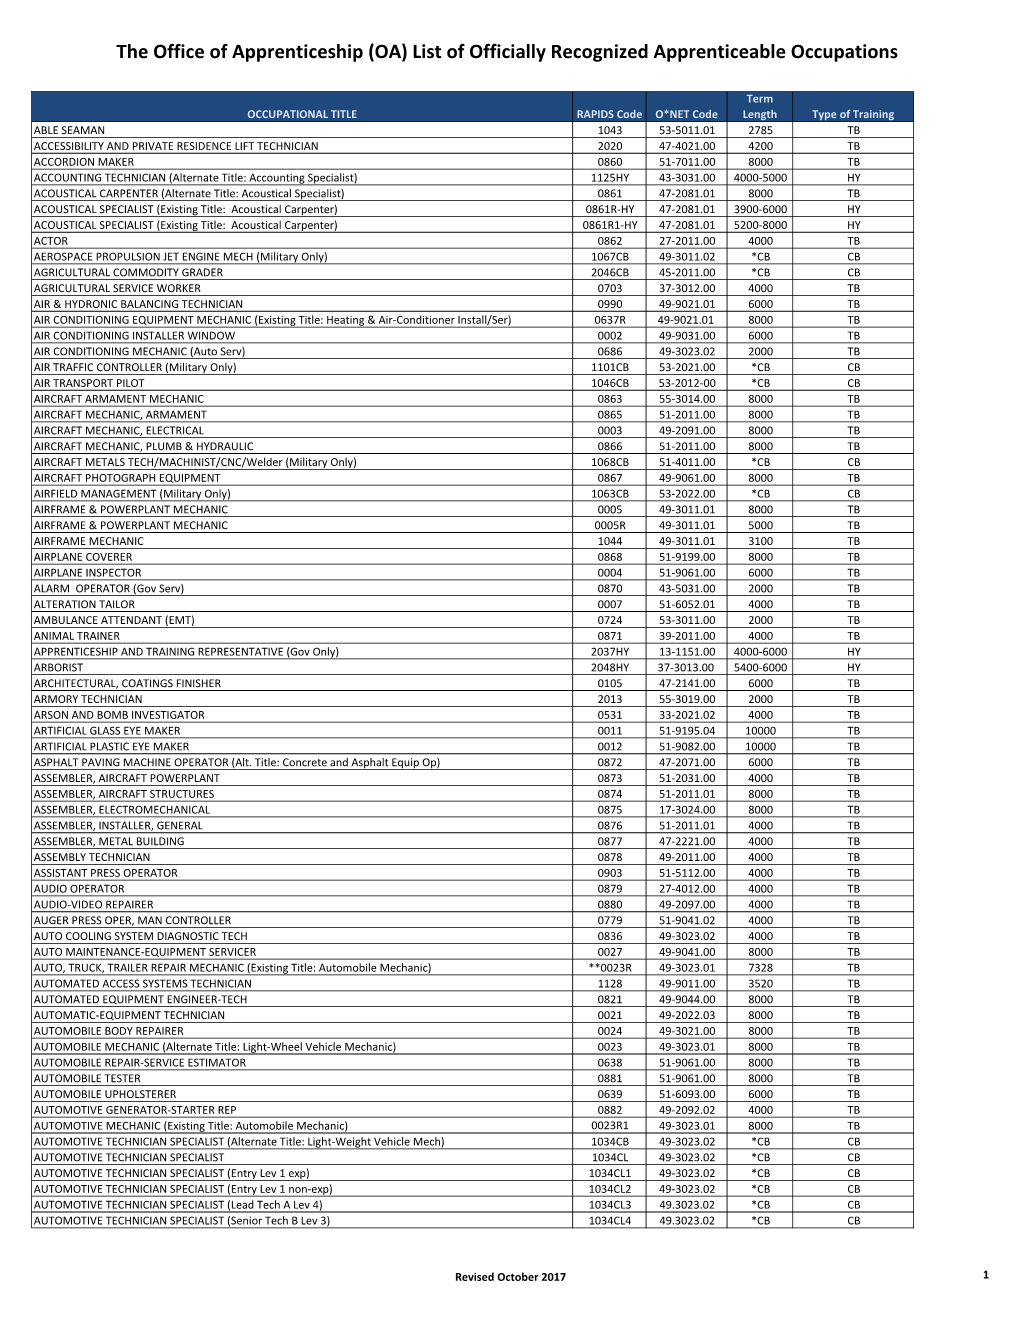 (OA) List of Officially Recognized Apprenticeable Occupations